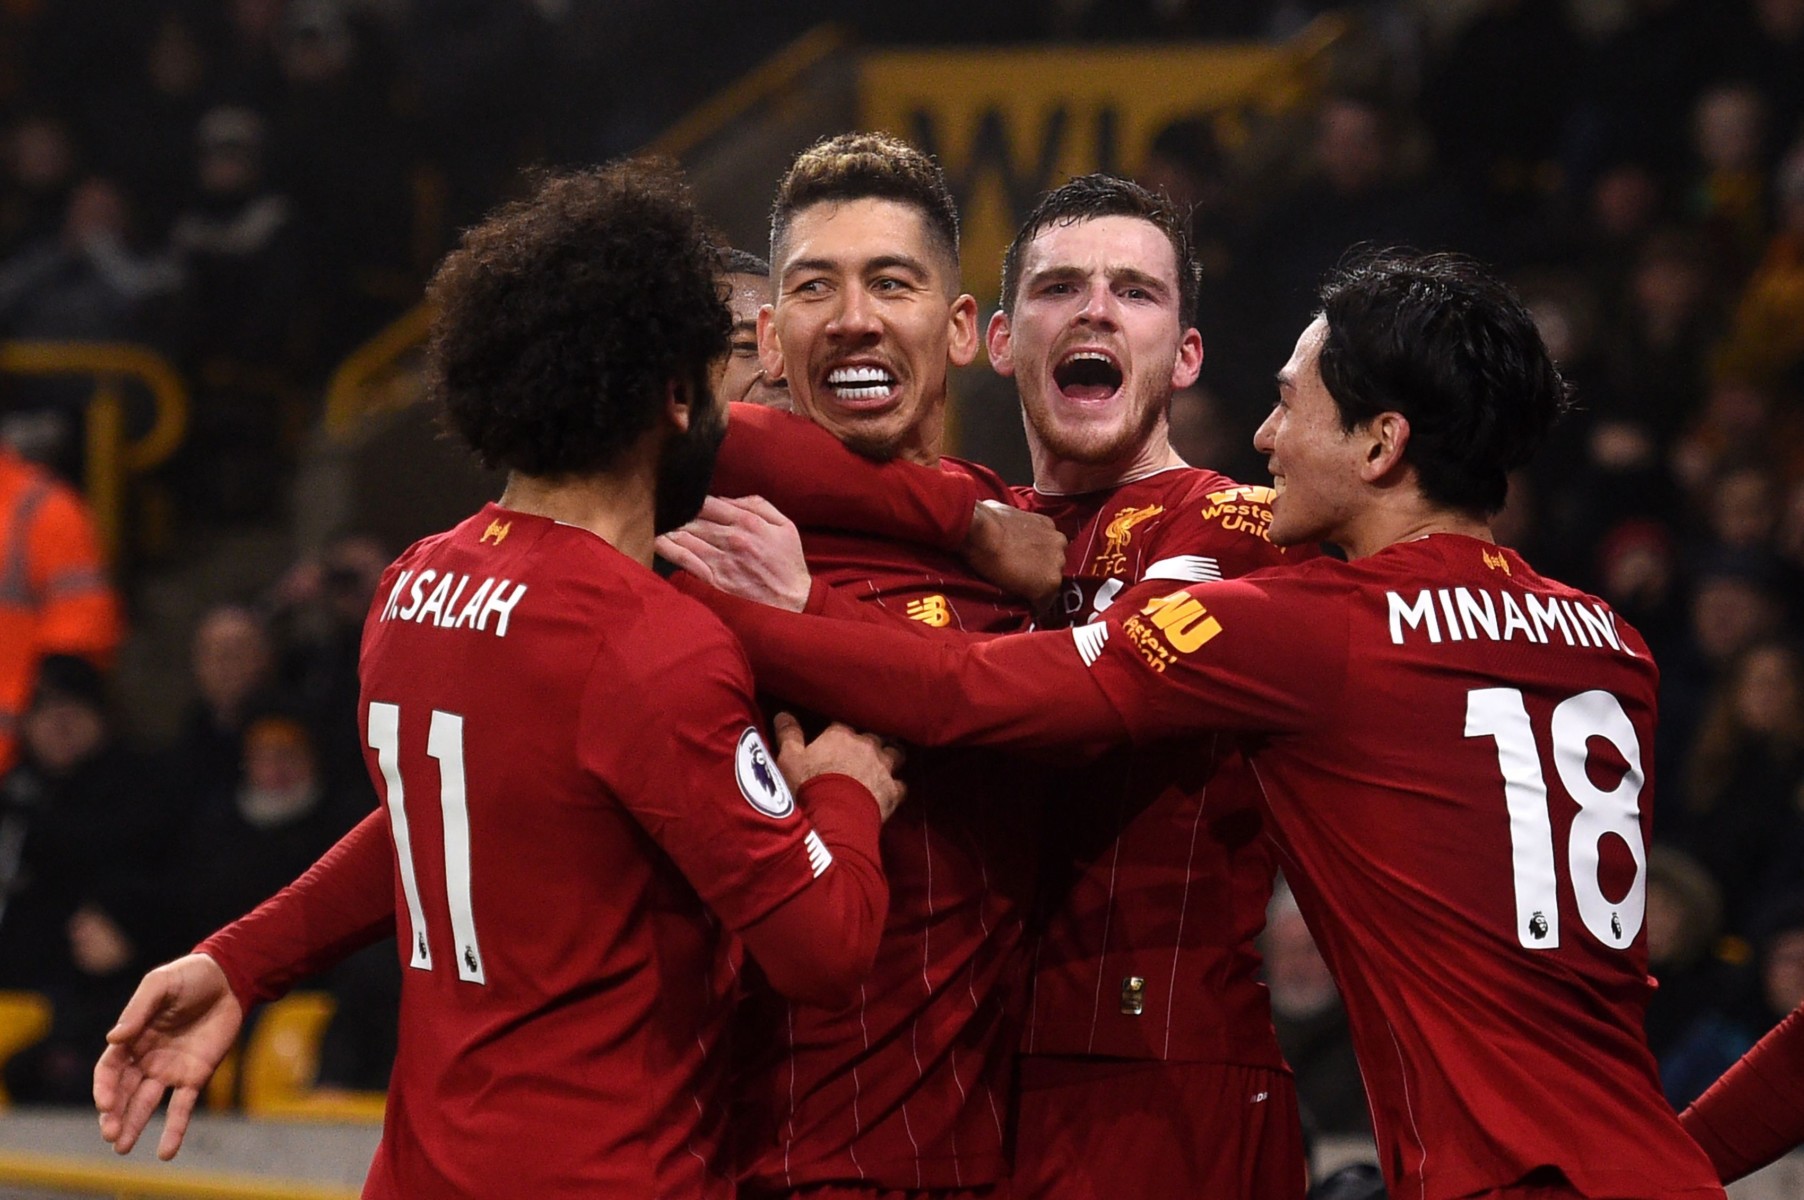 , Football betting tips: Firmino to net against Norwich, Arsenal back to winning ways and bore fest in Chelsea vs Man Utd